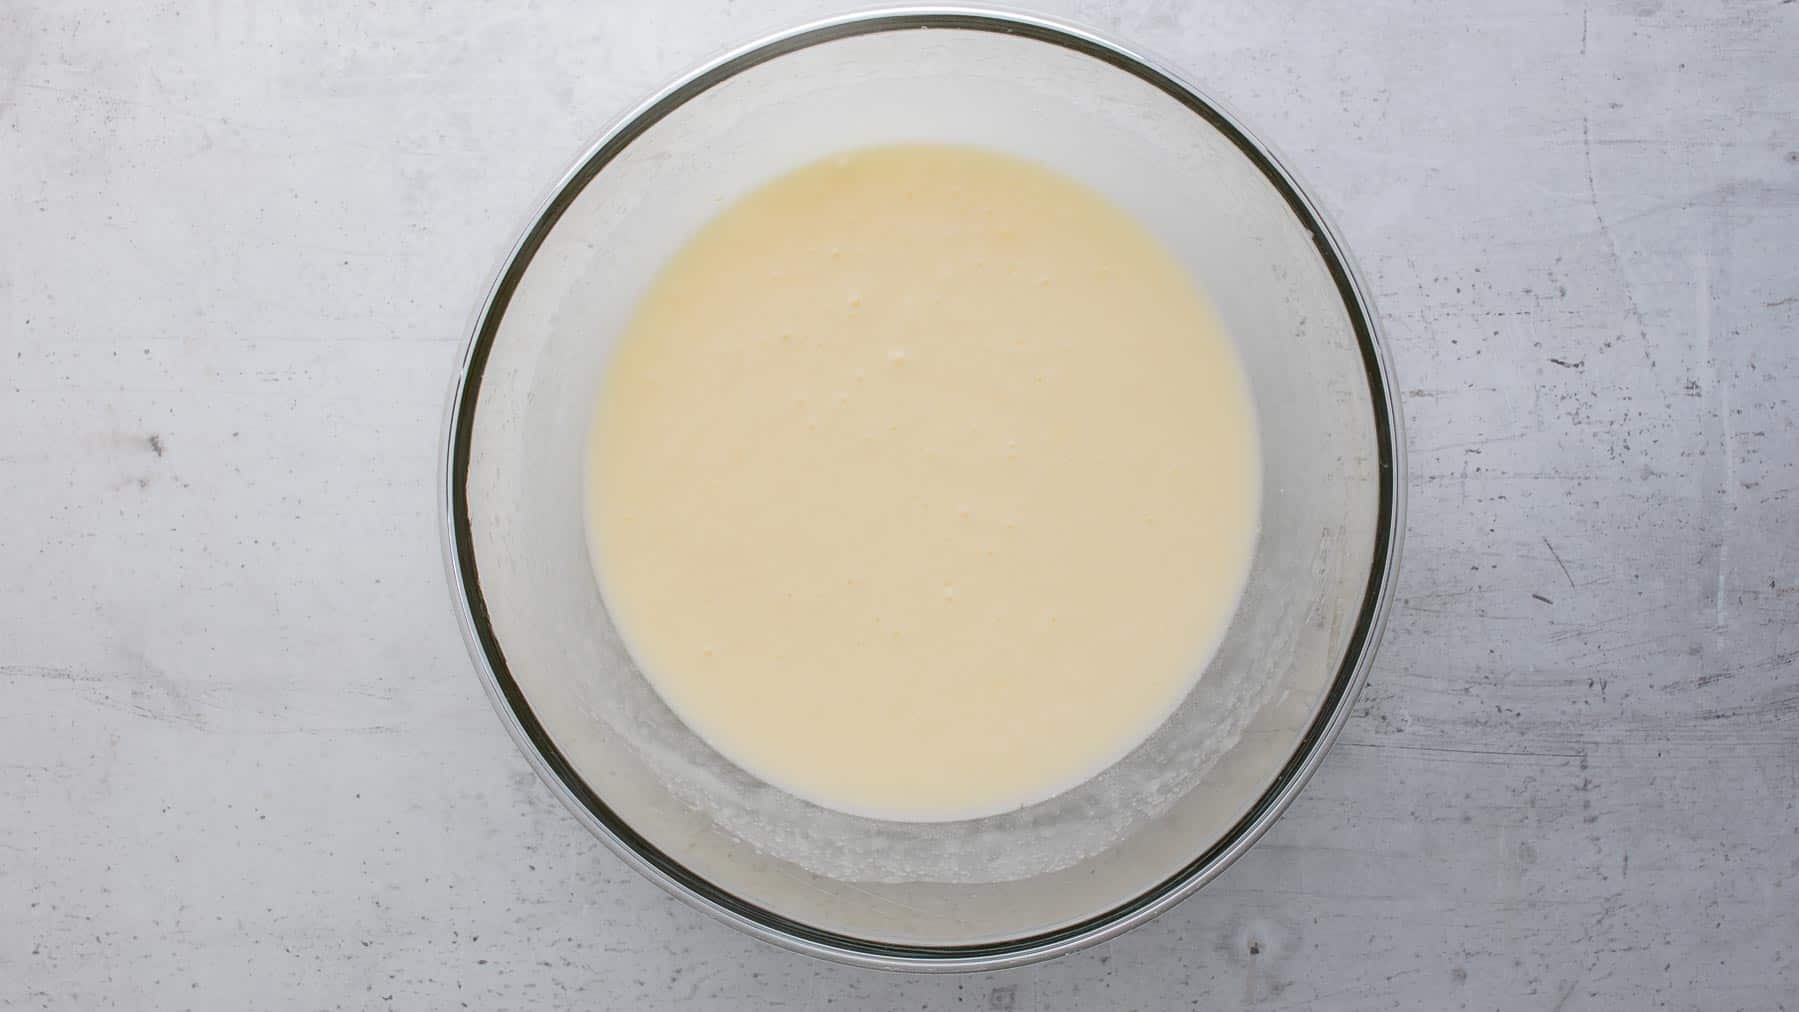 all wet ingredients of cake batter in a glass bowl